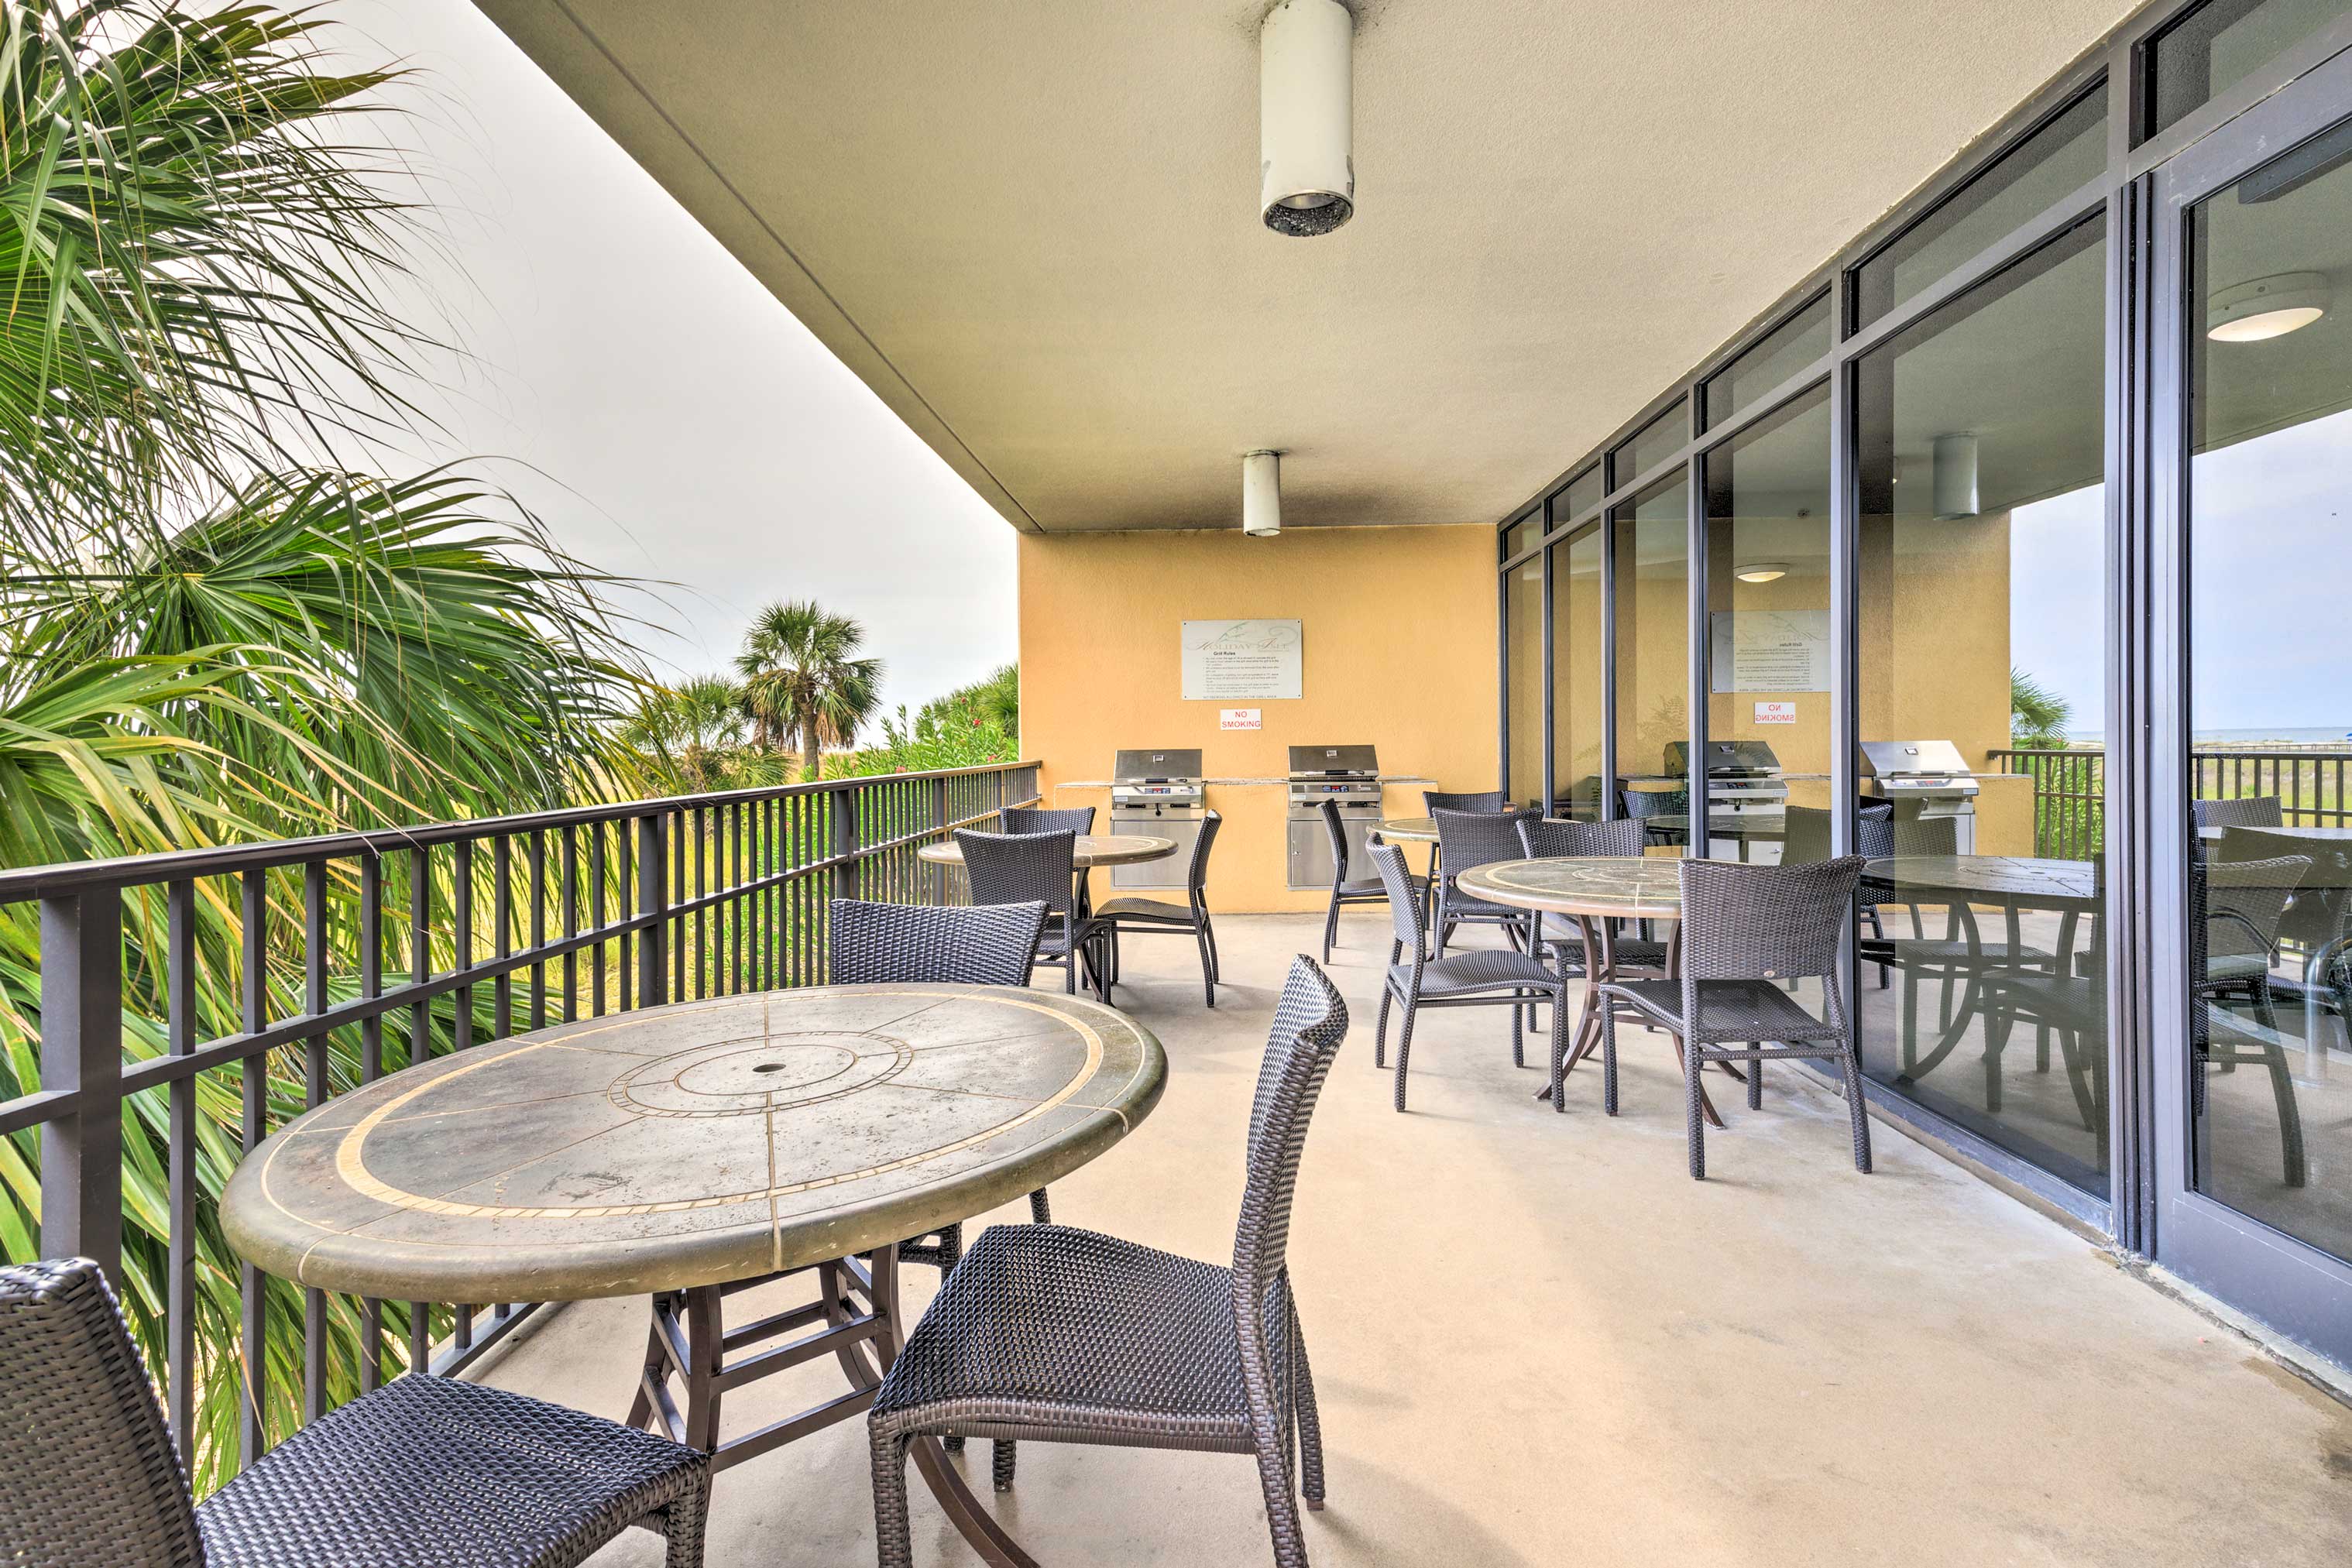 The resort amenities include an outdoor dining area with BBQ grills.